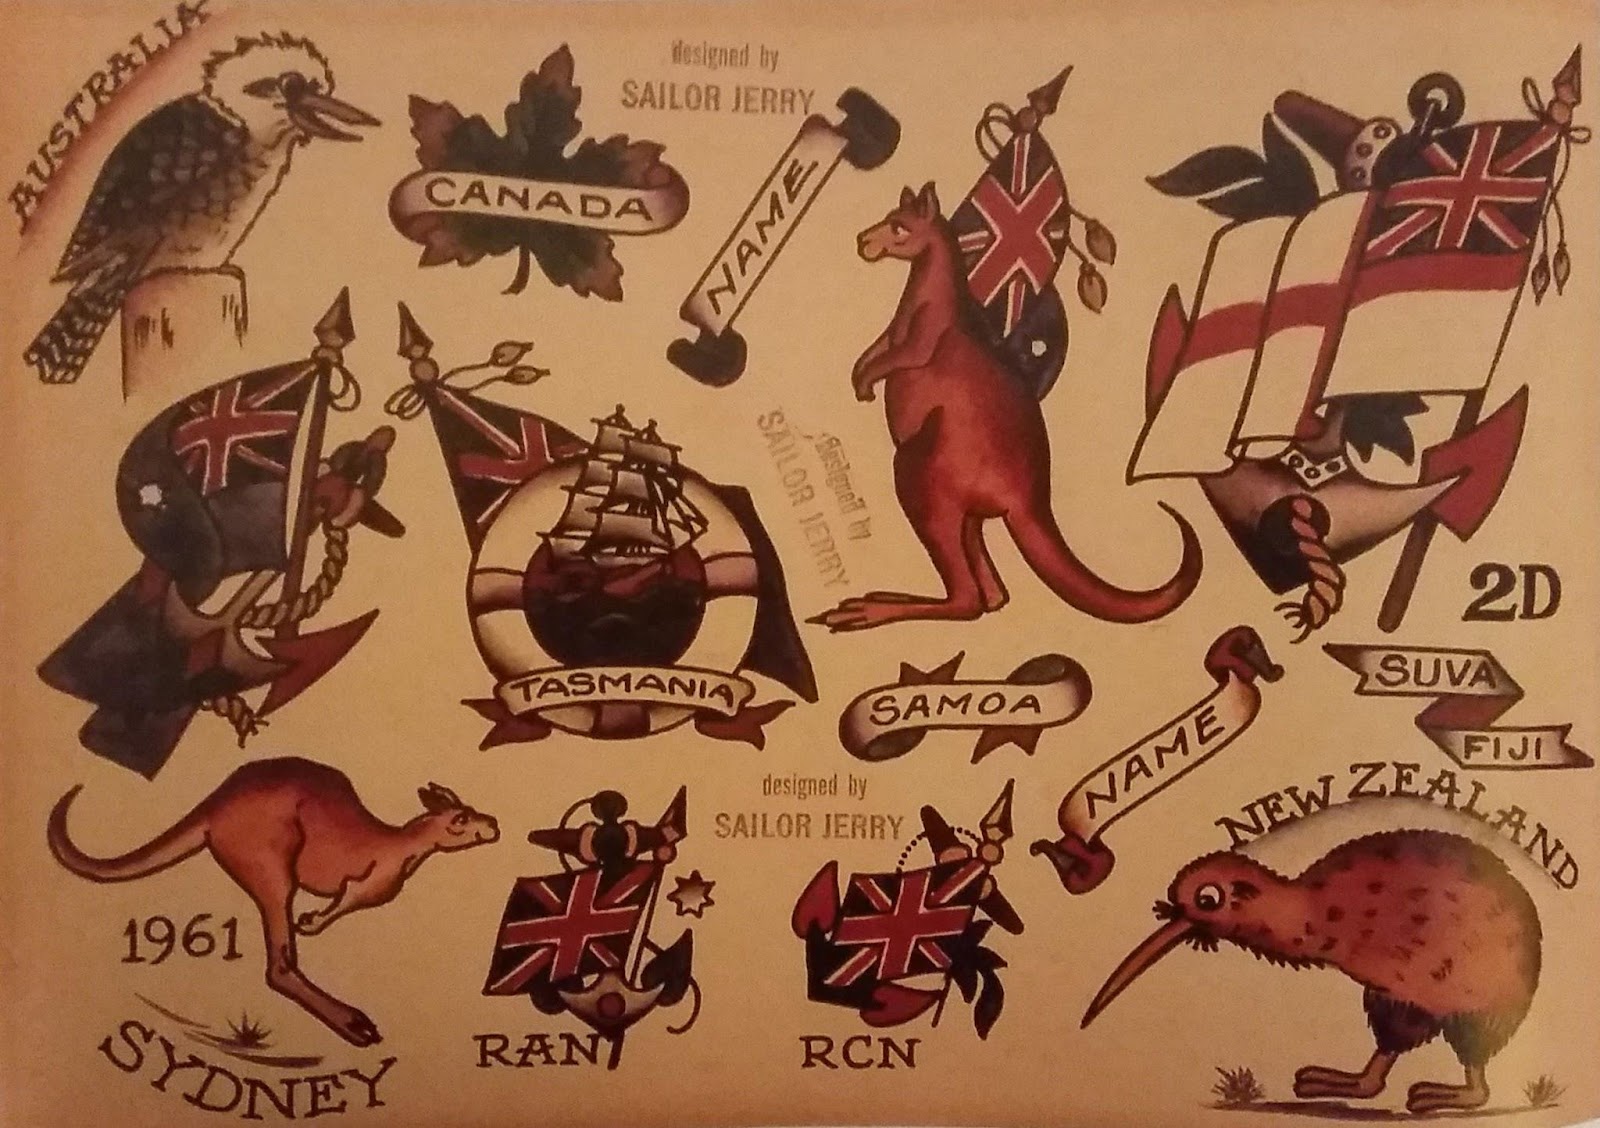 Australian Tattoos and The Stories Behind Them: Learn About the Rich Traditions It Is Based On